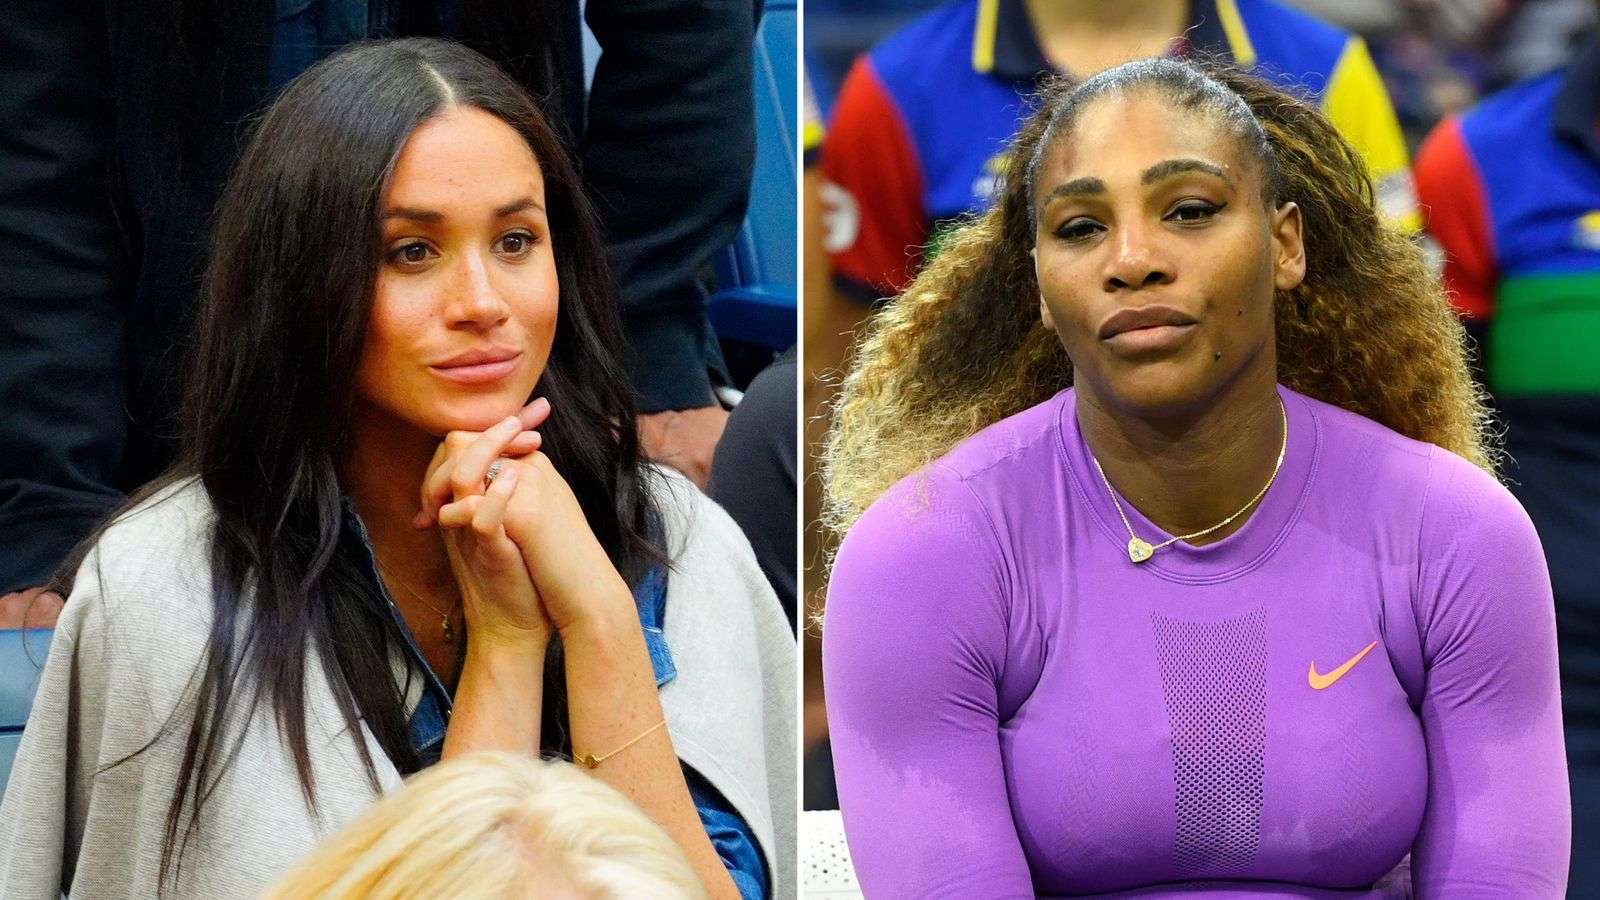 "Meghan Markle Replies Serena Williams: 'I regret Ever overstepping Our boundaries; I should have foreseen the consequences.'" Could She Be Guilty??